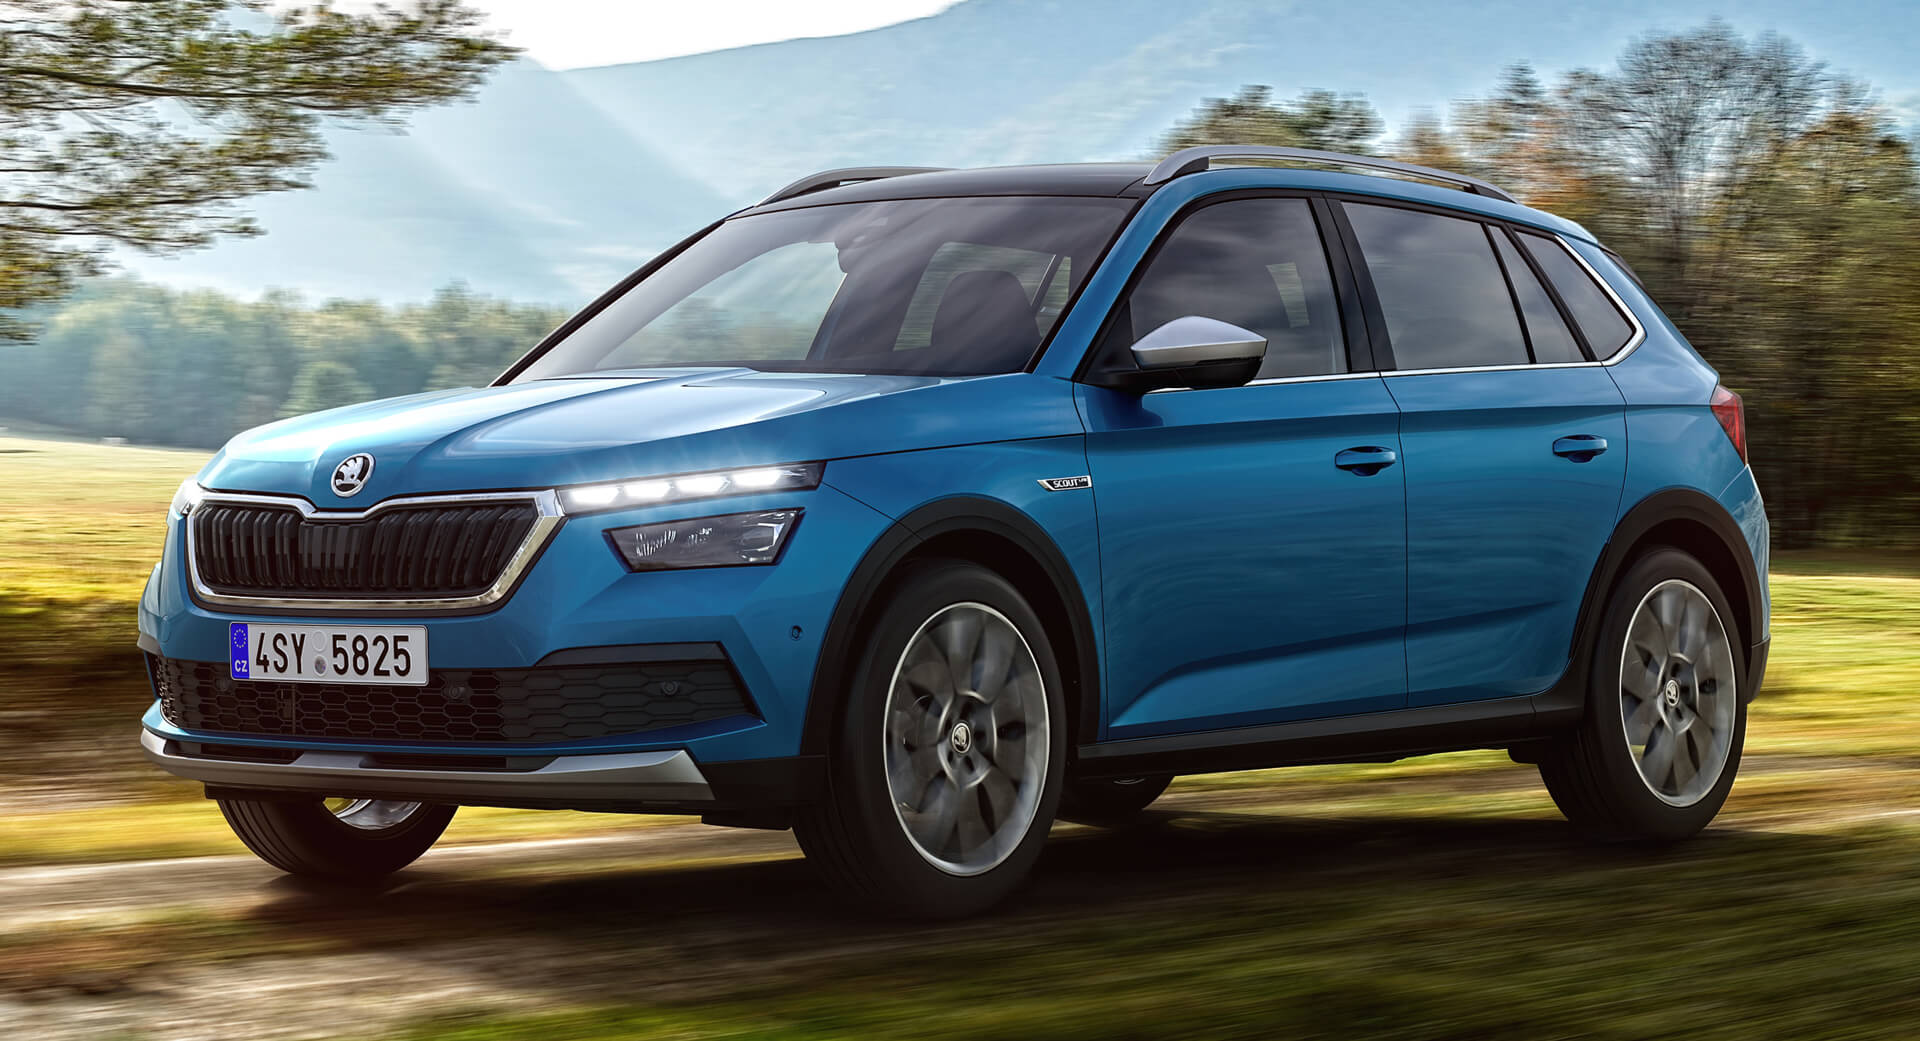 2020 Skoda Kamiq Gets The Scoutline Treatment, Will Launch This Summer